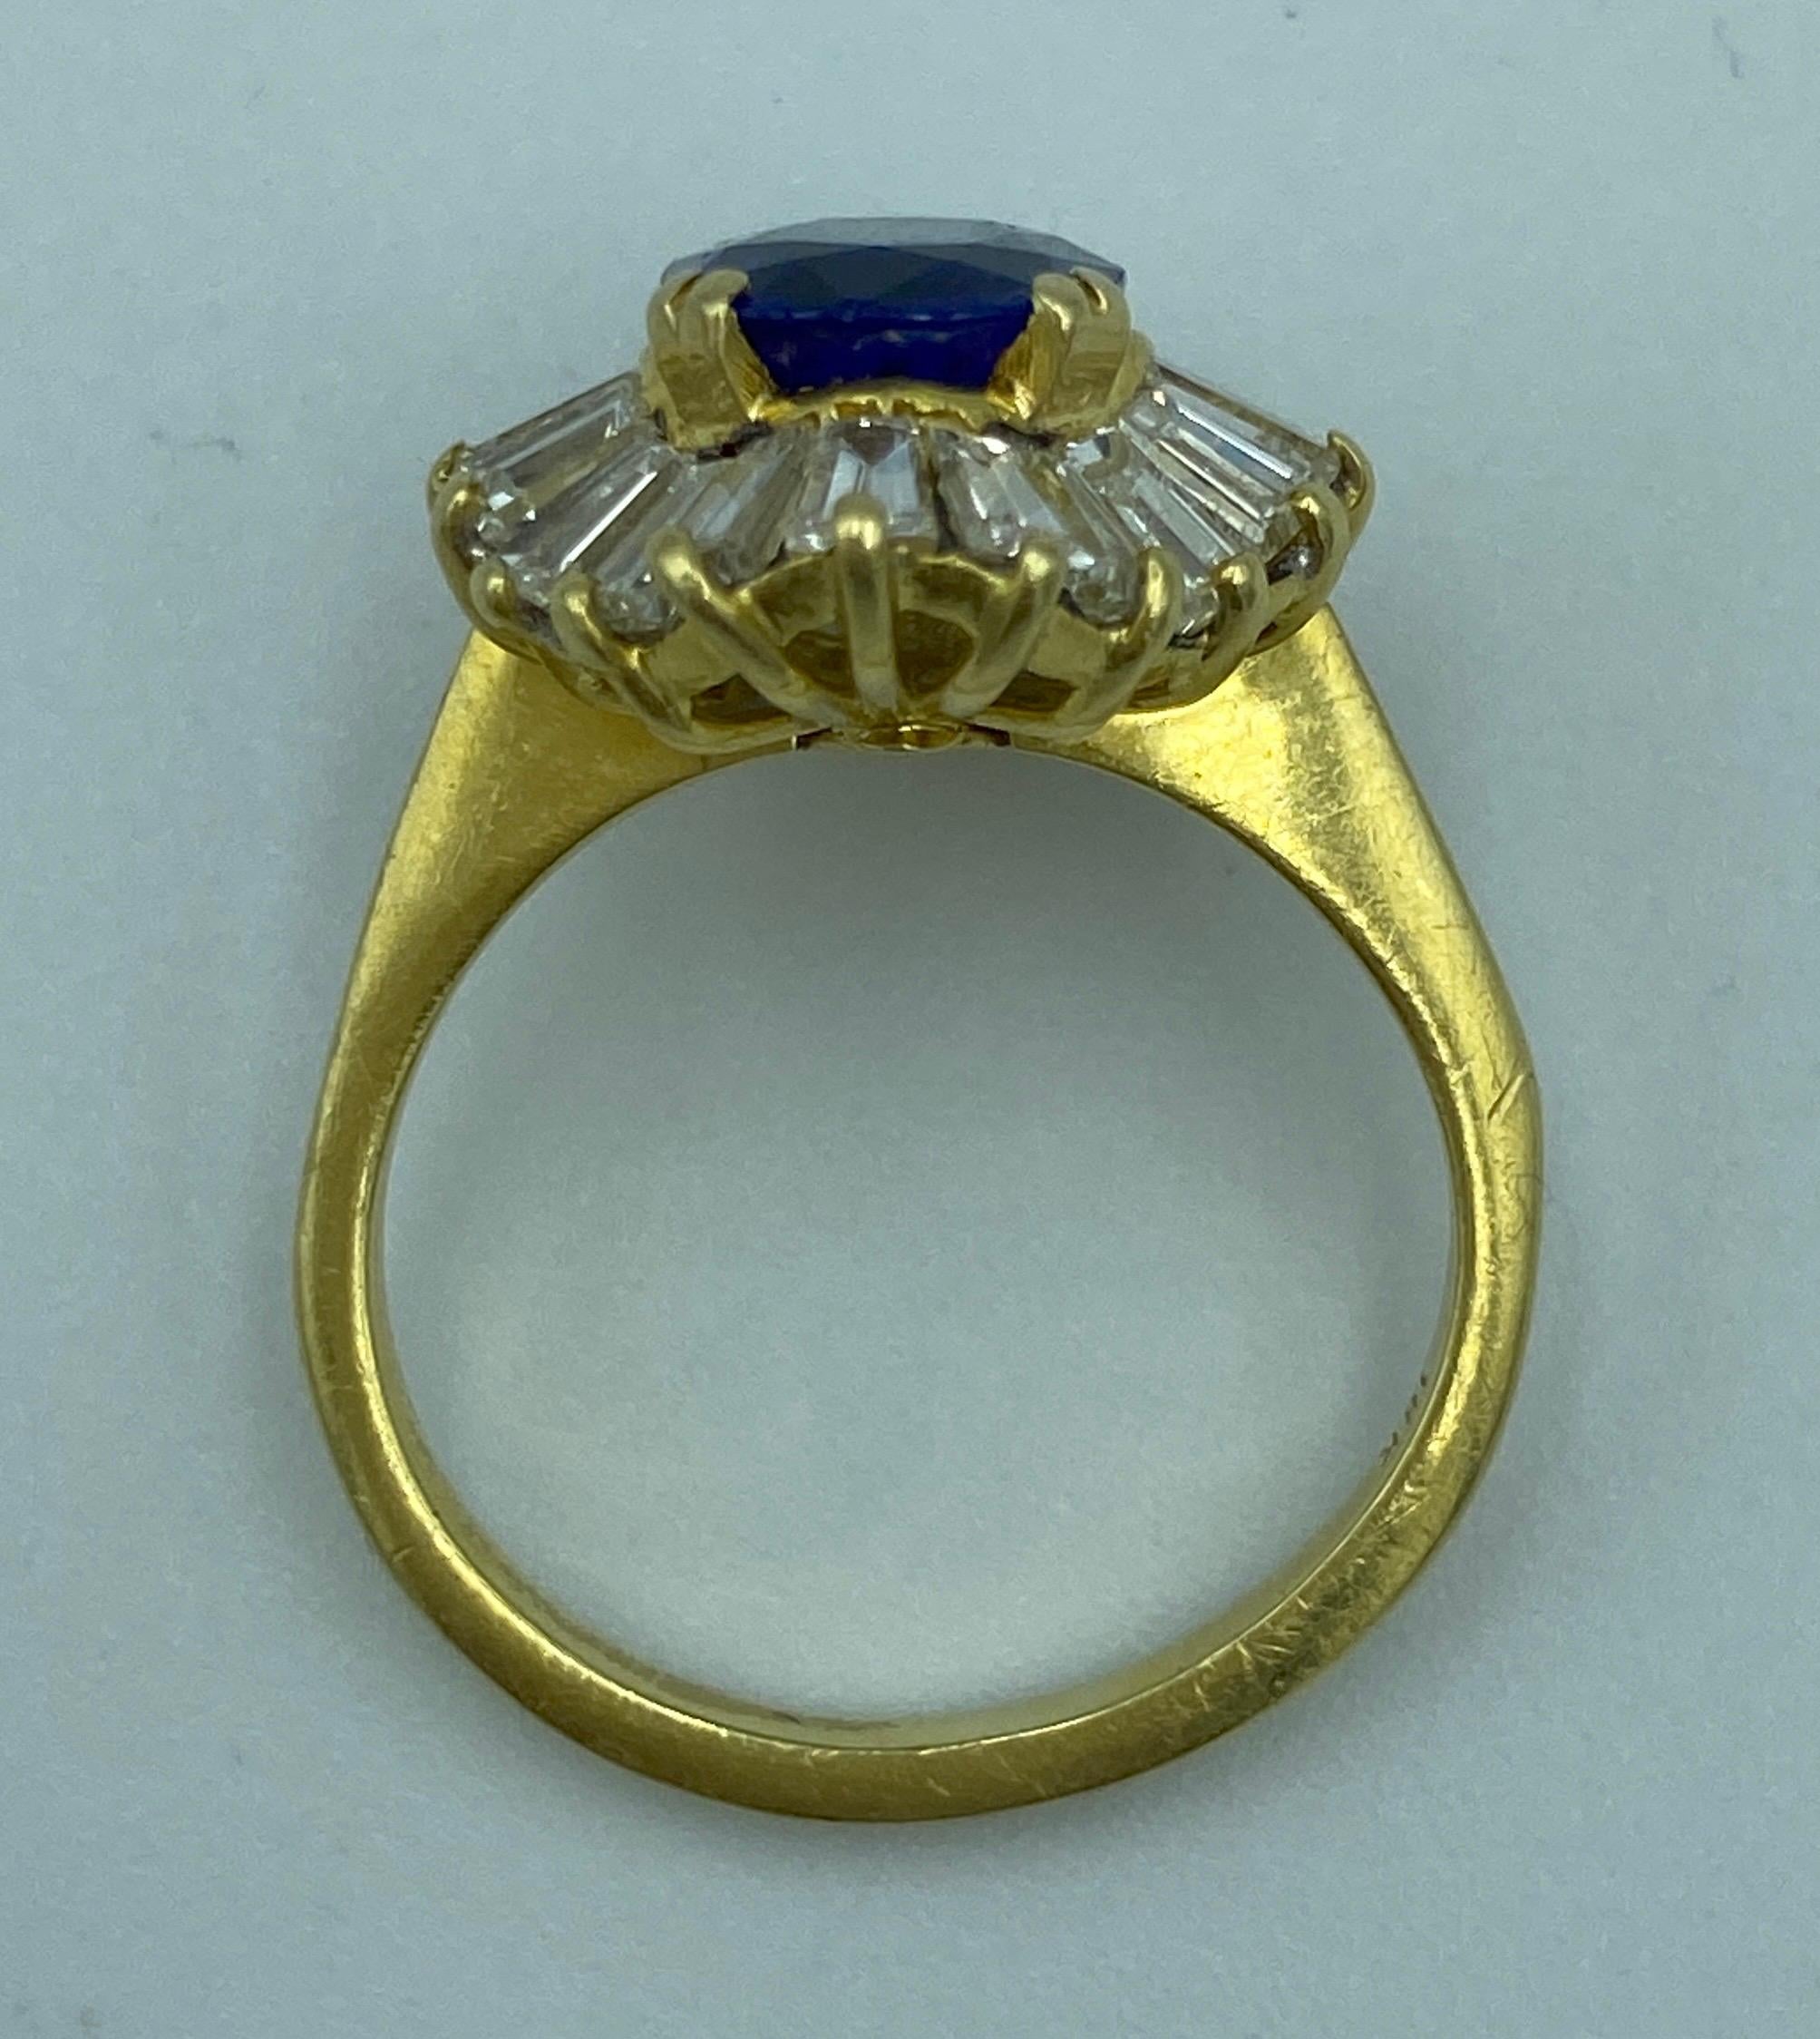 1950s Italian 2.5 carat Ceylon Sapphire and 1.5 c tapered baguette diamond ring For Sale 1